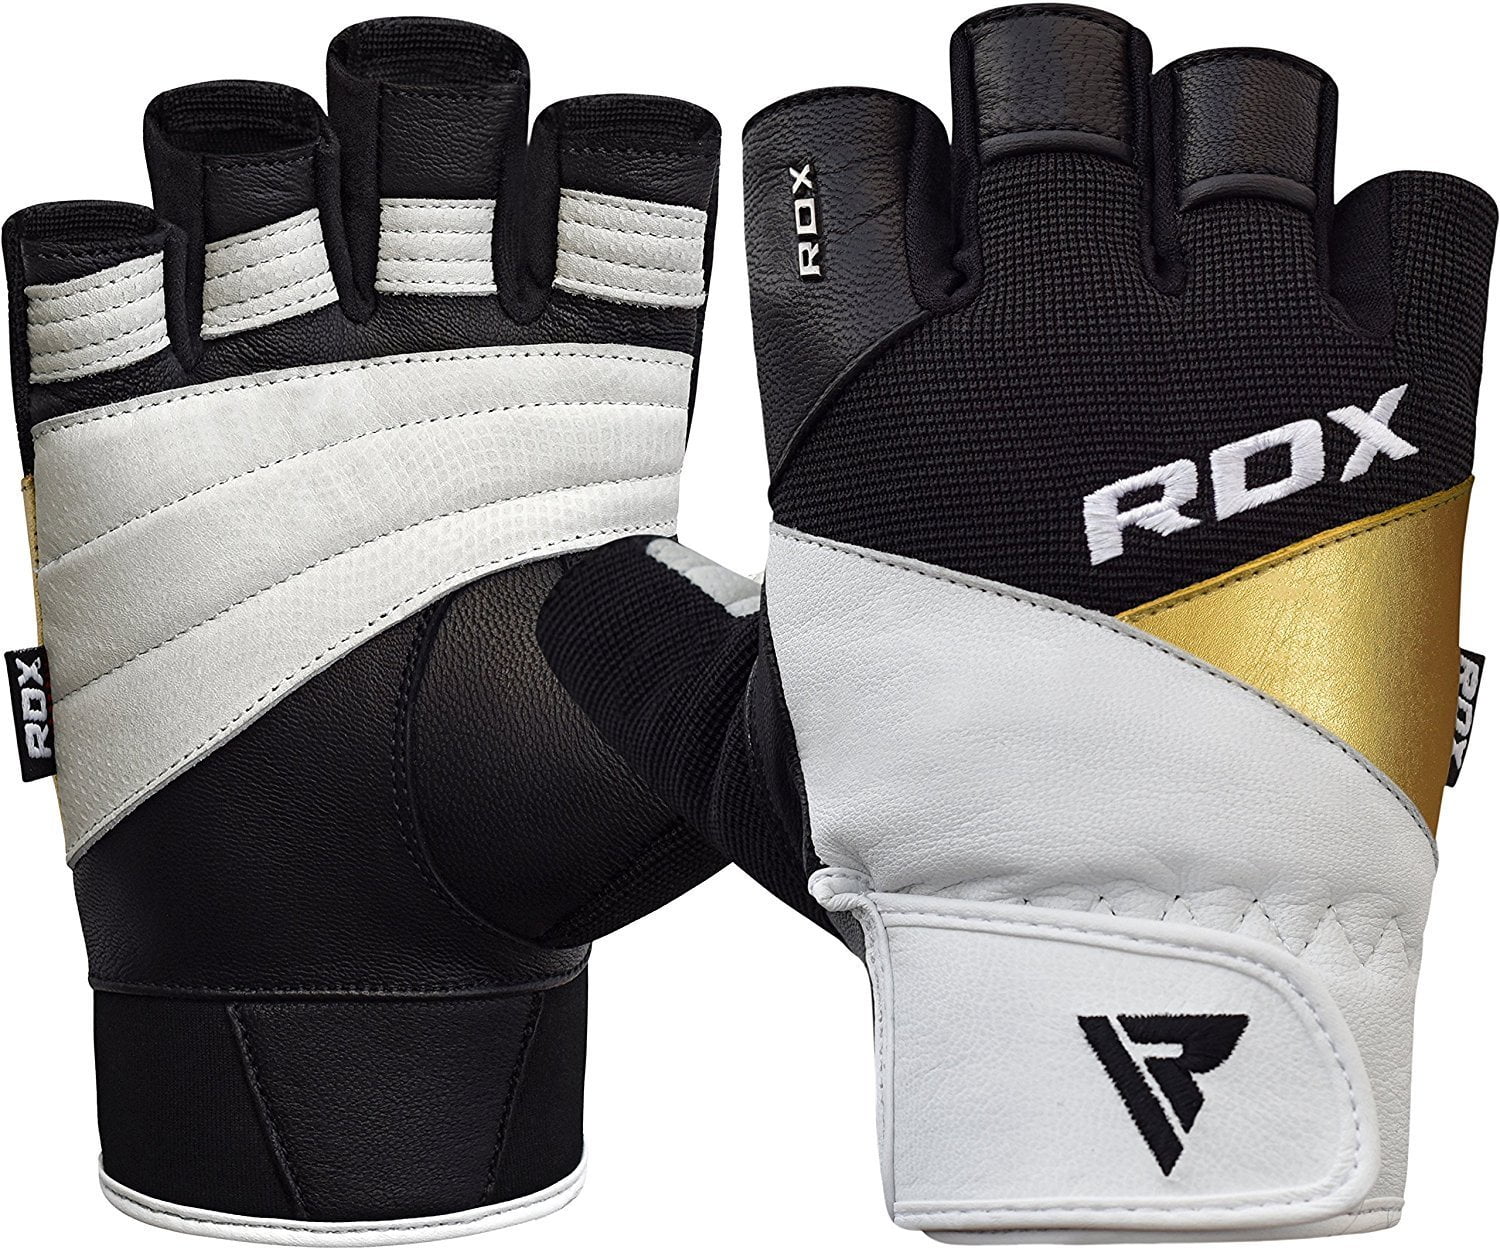 RDX Weight Lifting Gloves Gym Fitness Workout Powerlifting Bodybuilding Exercise Cowhide Leather Breathable Wrist Support Strength Training 